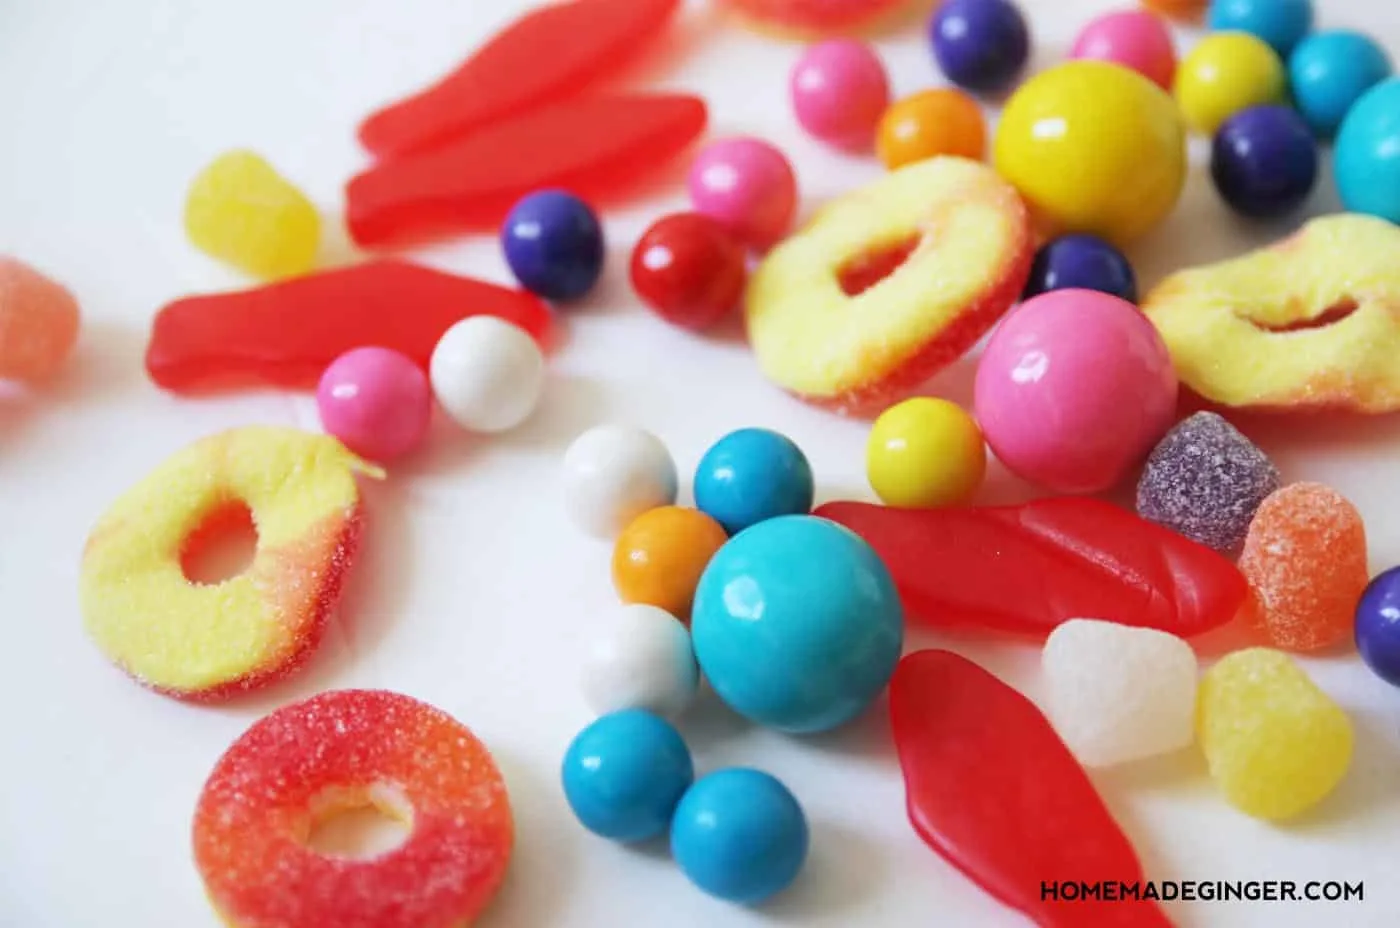 Mix up your holiday decor by making some DIY candy garlands! This is such a great project for kids to help with!